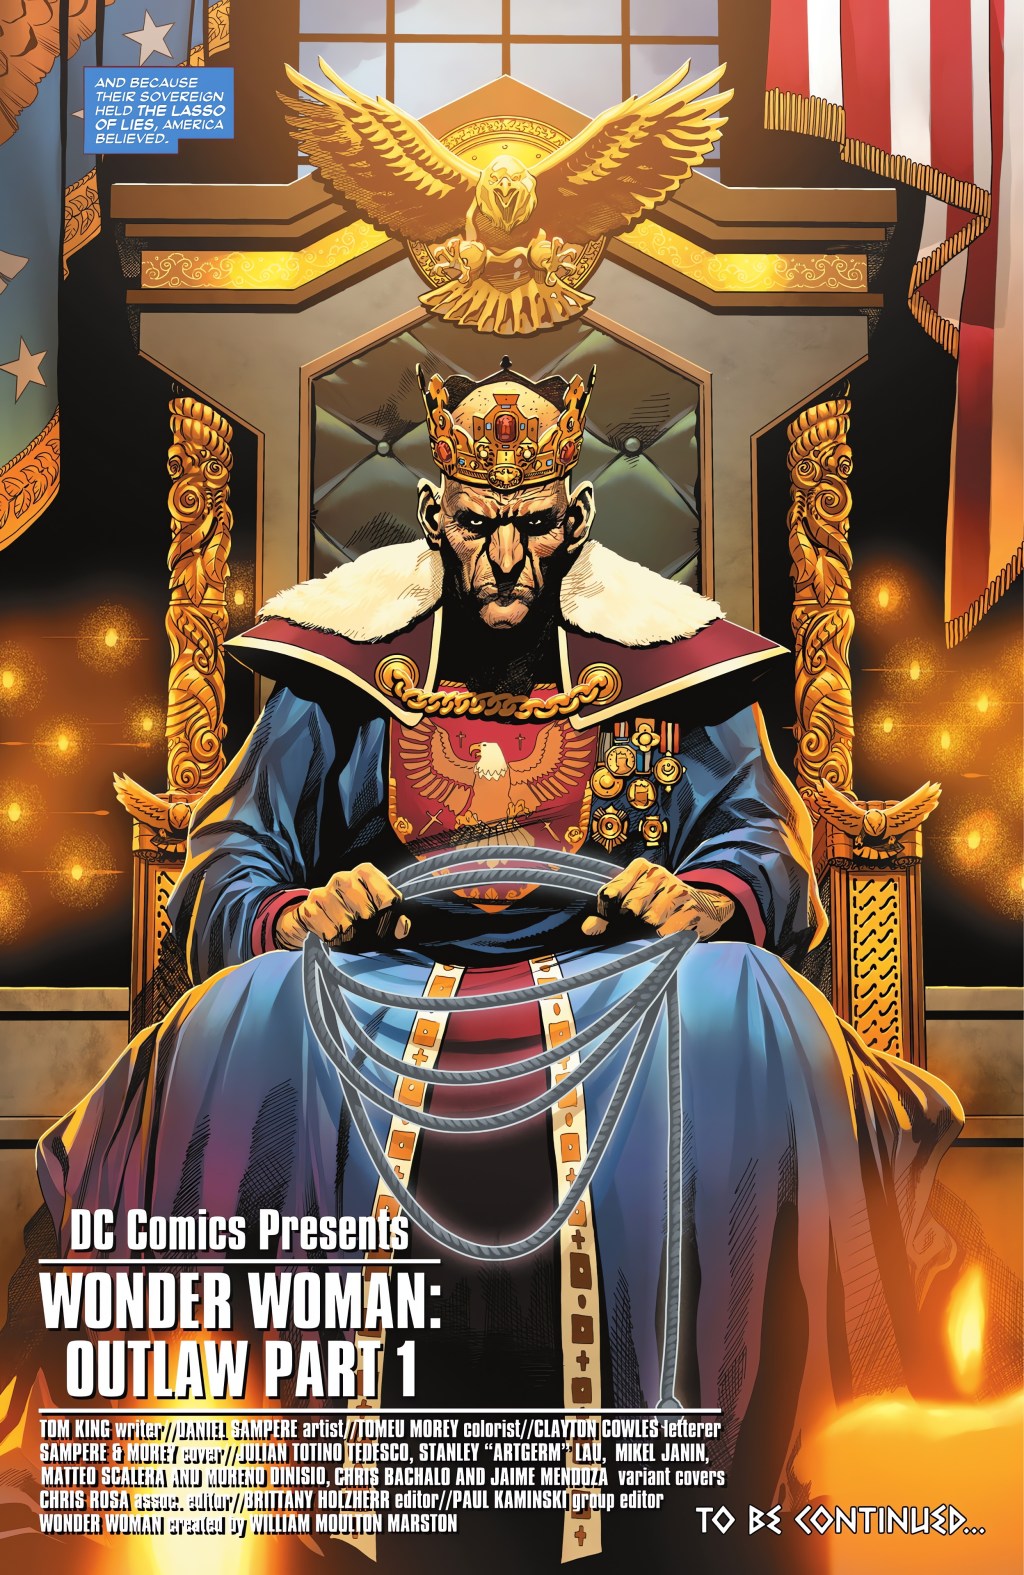 The Sovereign is revealed as the true rule of America in Wonder Woman Vol. 6 #1 "Wonder Woman: Outlaw Part 1" (2023), DC. Words by Tom King, art by Daniel Sampere, Tomeu Morey, and Clayton Cowles.